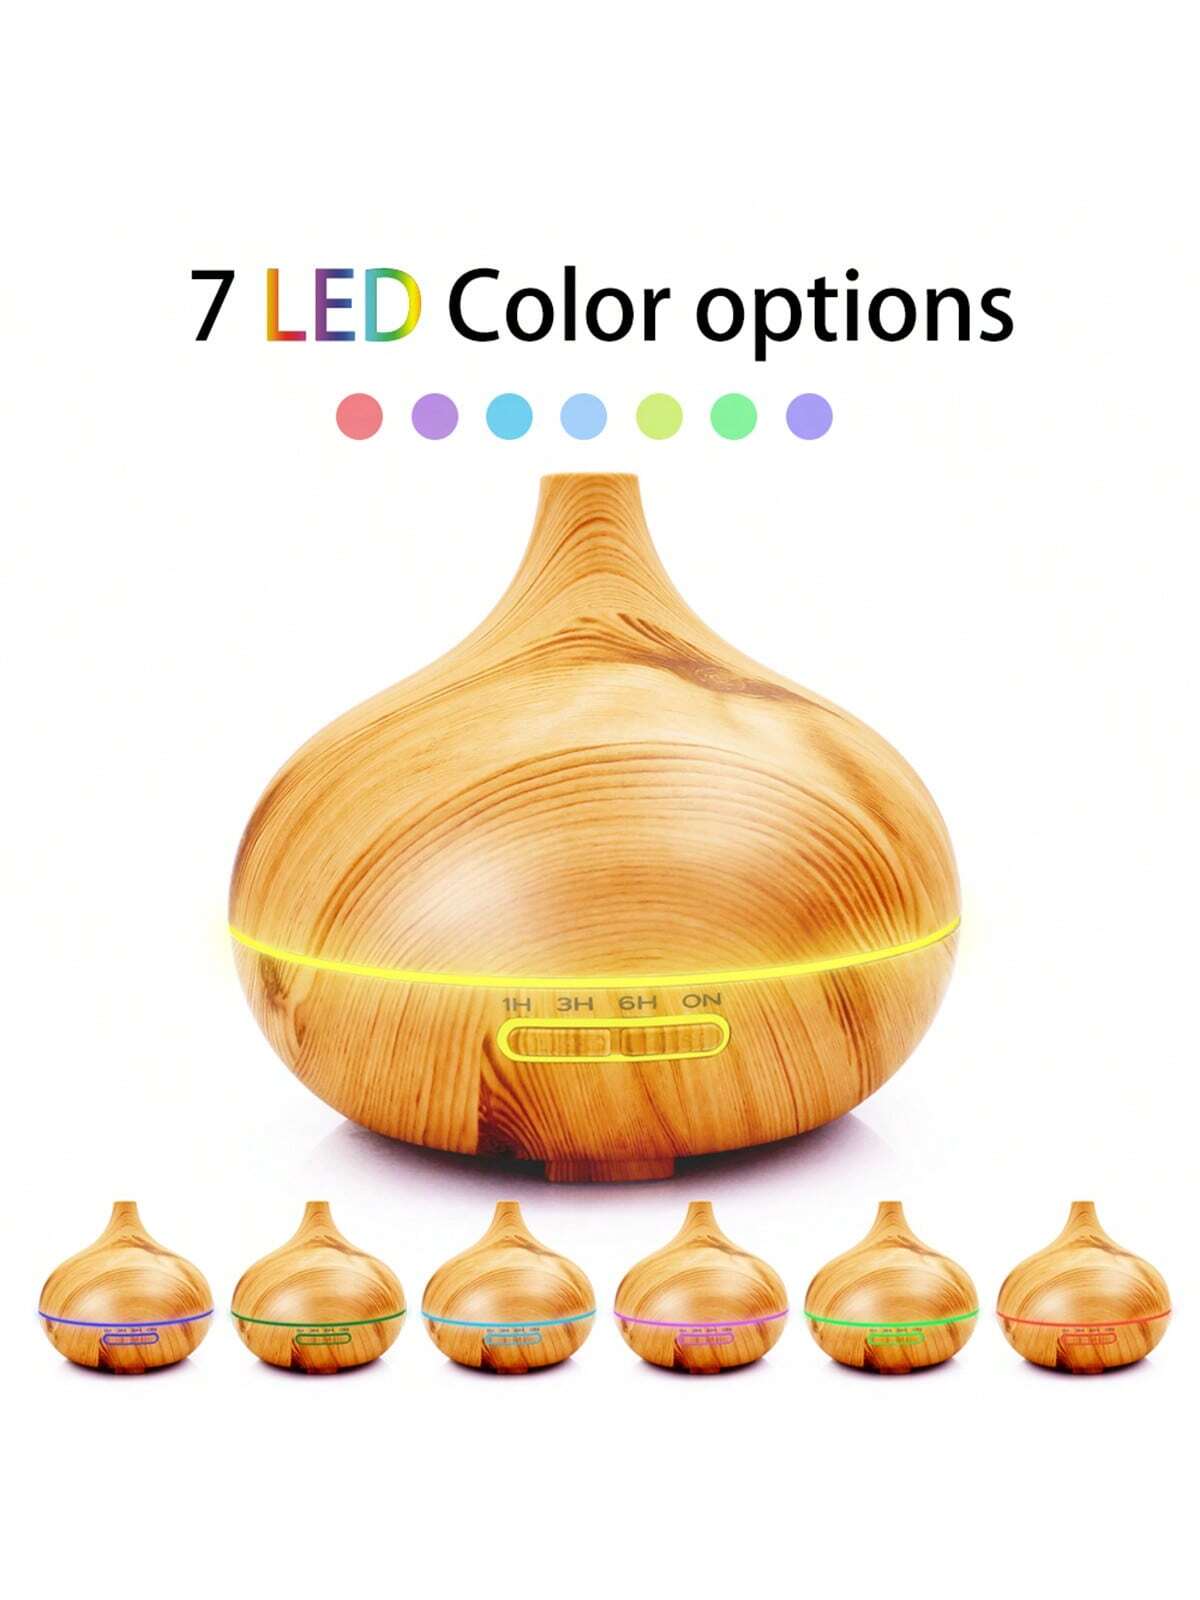 1pc Humidifier300ml Premium, Essential Oil Diffuser with Remote Control, 5 in 1 Ultrasonic Aromatherapy Fragrant Oil Humidifier Vaporizer, Timer and Auto-Off Safety Switch-wood color-8